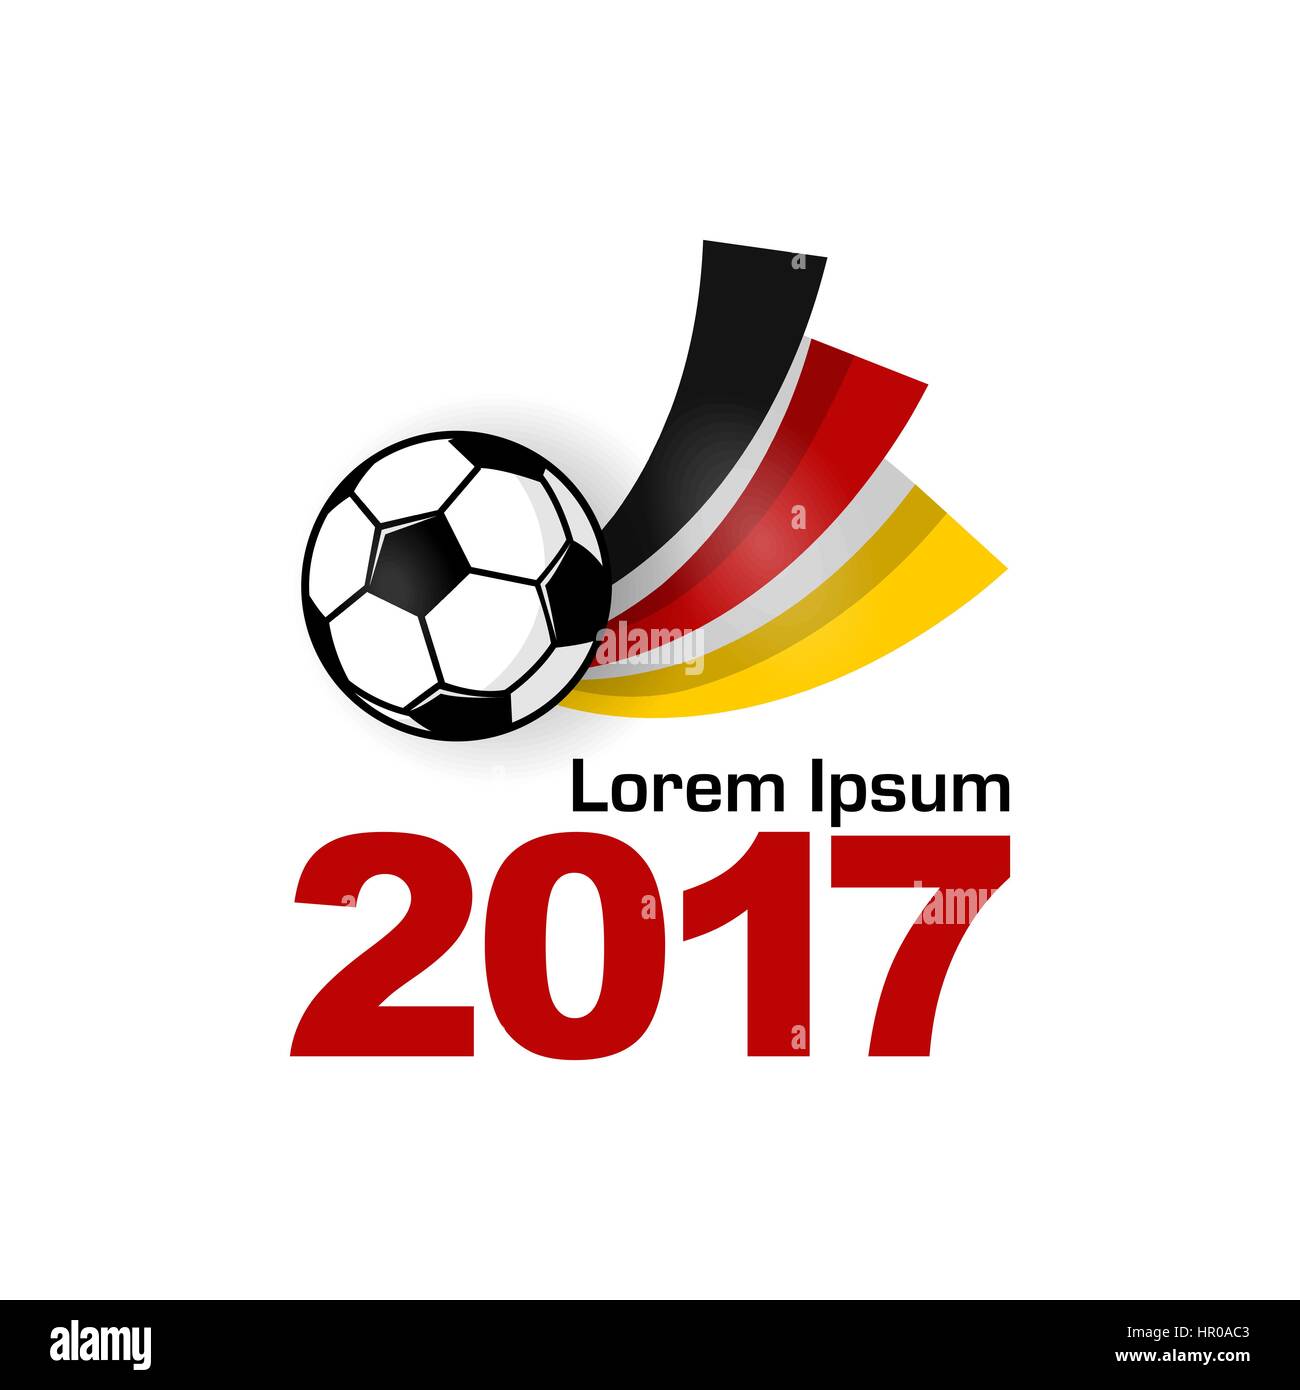 German flag and soccer ball. Stylized concept web banner on football game for funs and players. Emblem icon for football championship. Stock Vector